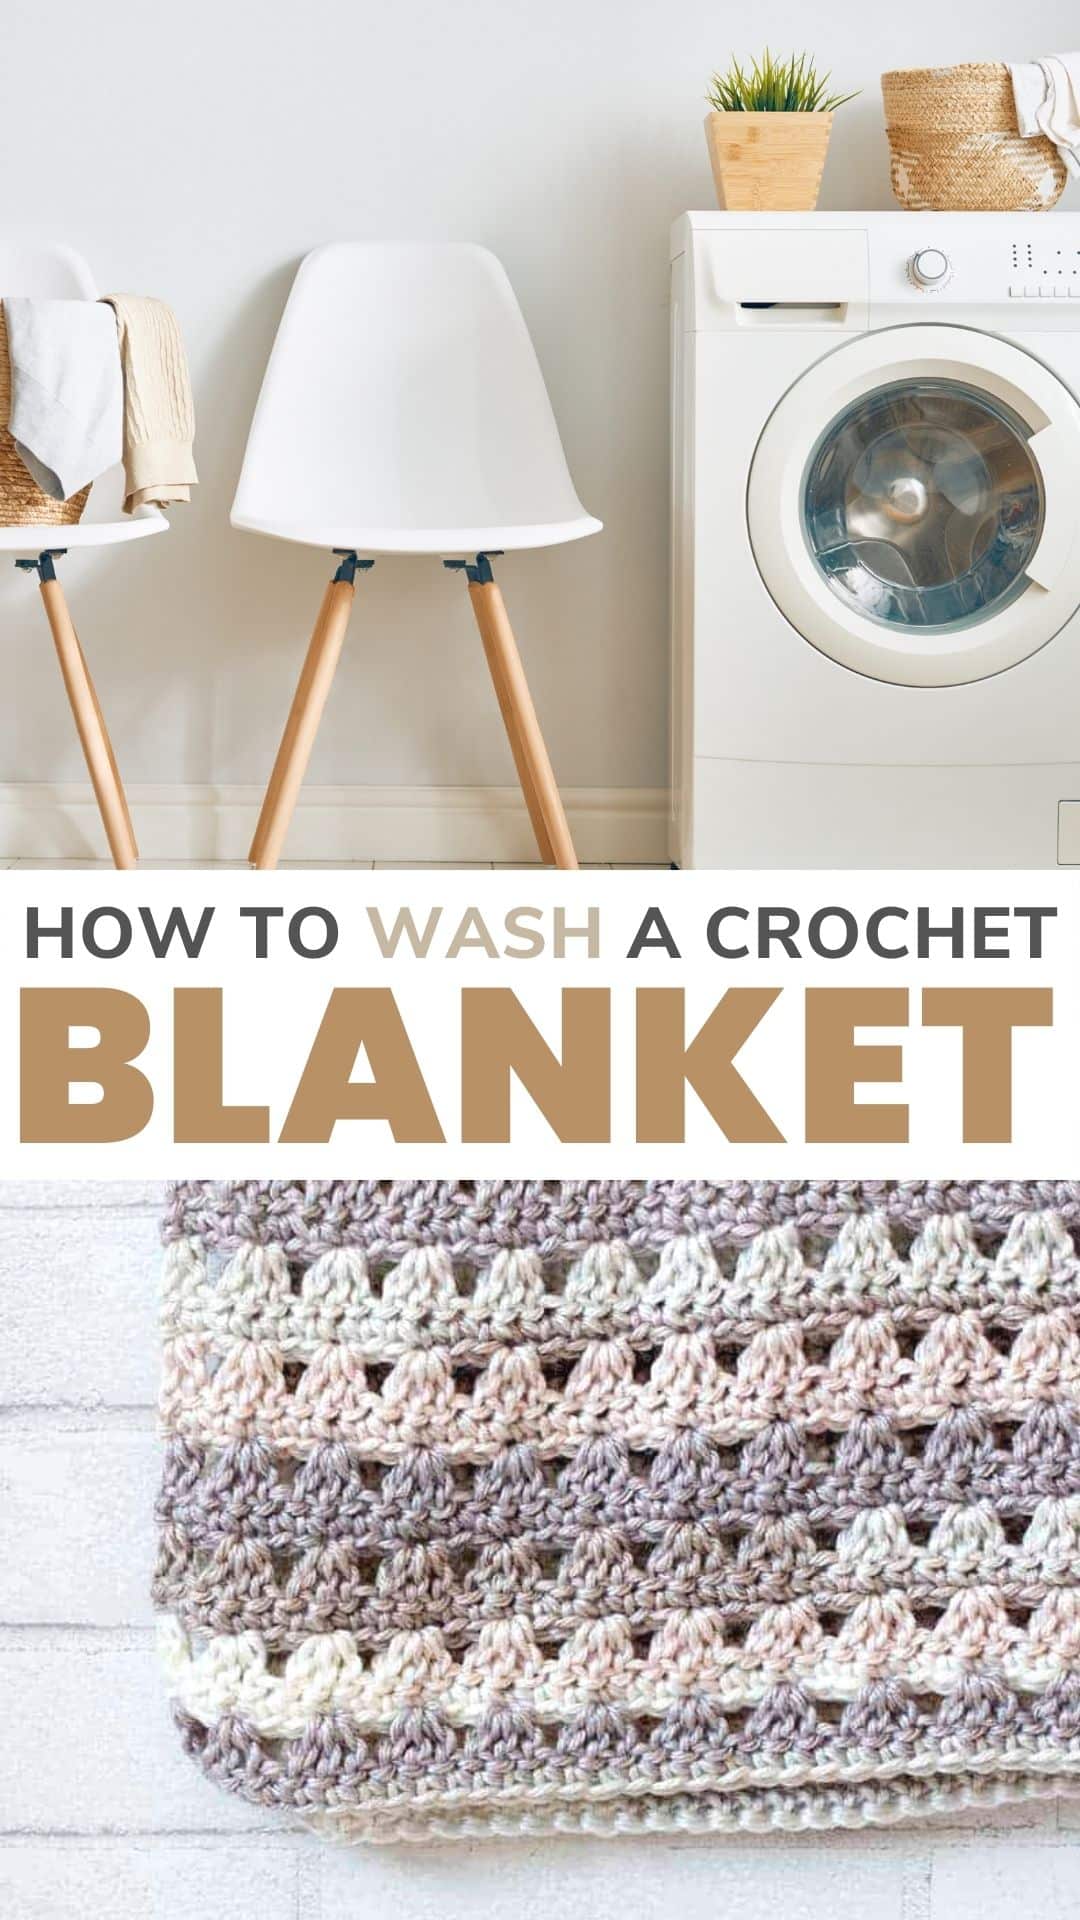 How to wash a crochet blanket